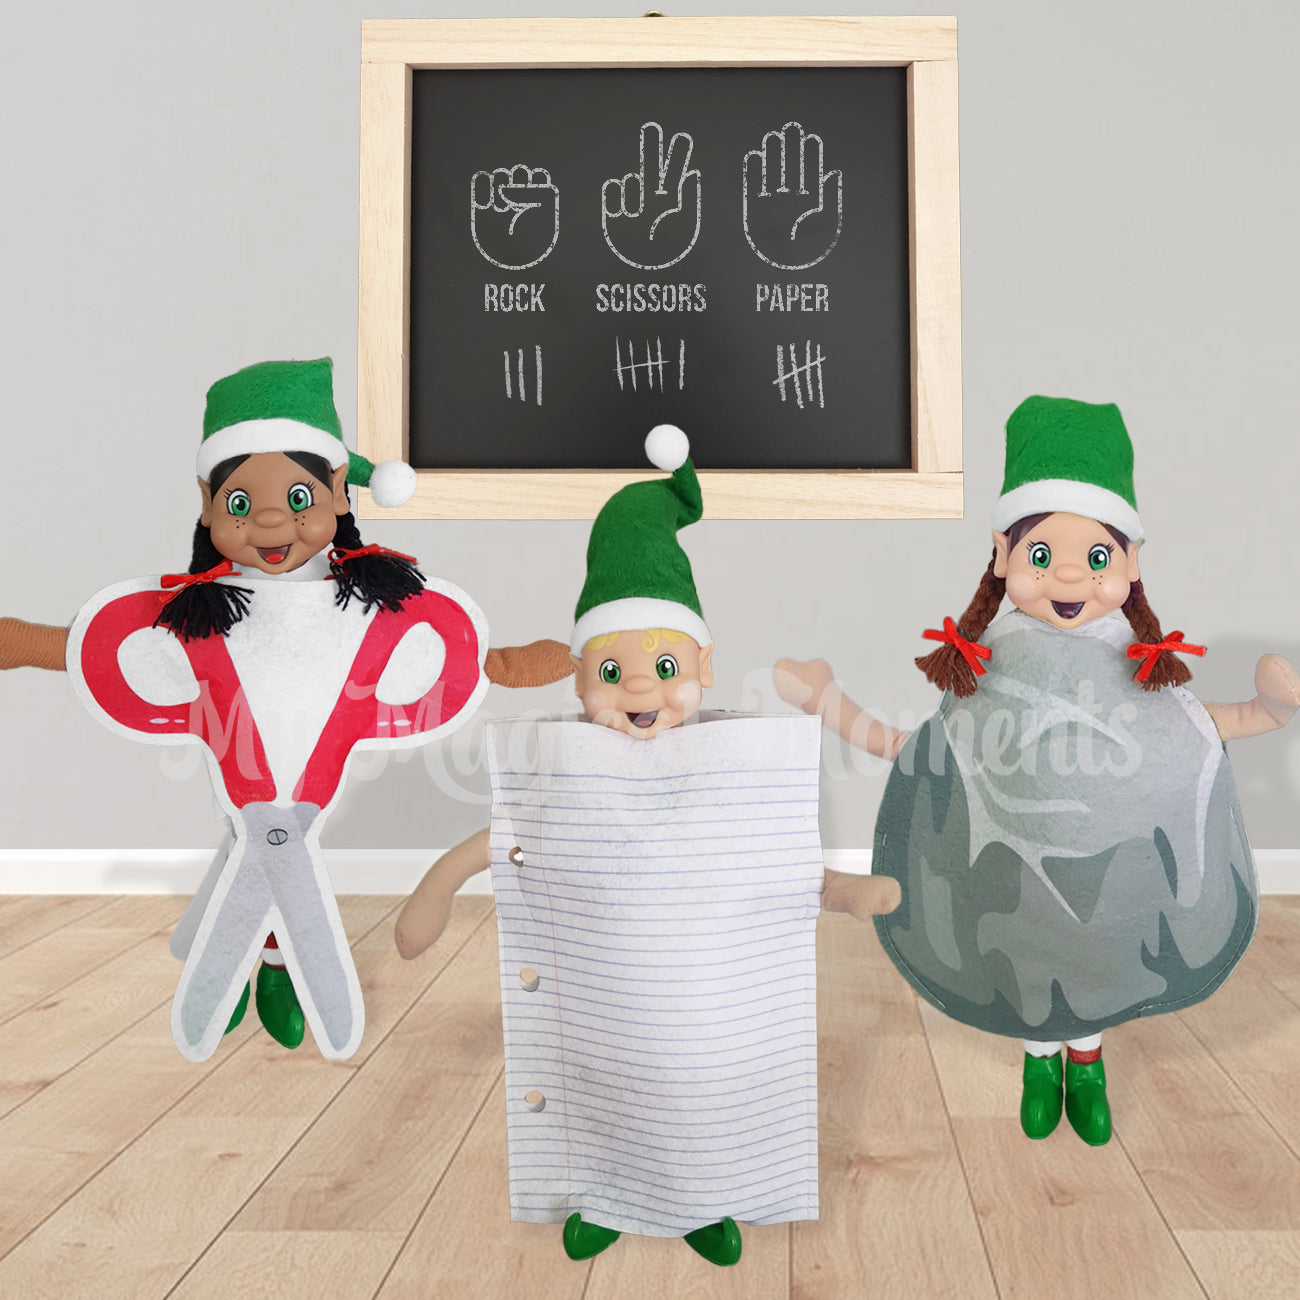 Elves in a room dressed up playing scissor, Paper, rock. There is a chalkboard behind them keeping score